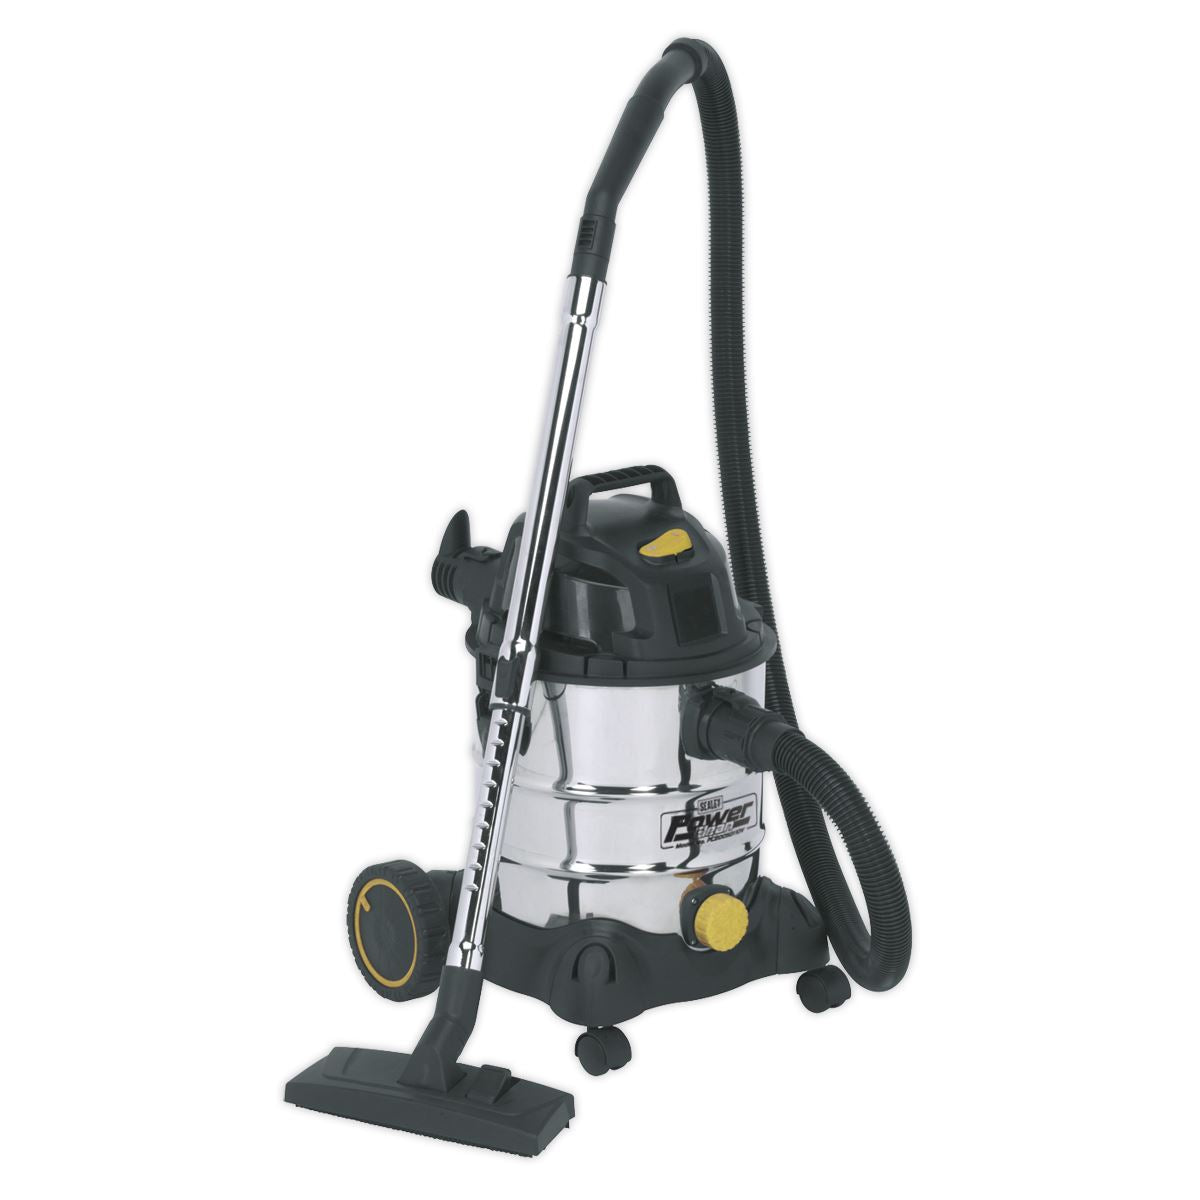 Sealey Vacuum Cleaner Industrial Wet & Dry 20L 1250W/110V Stainless Drum